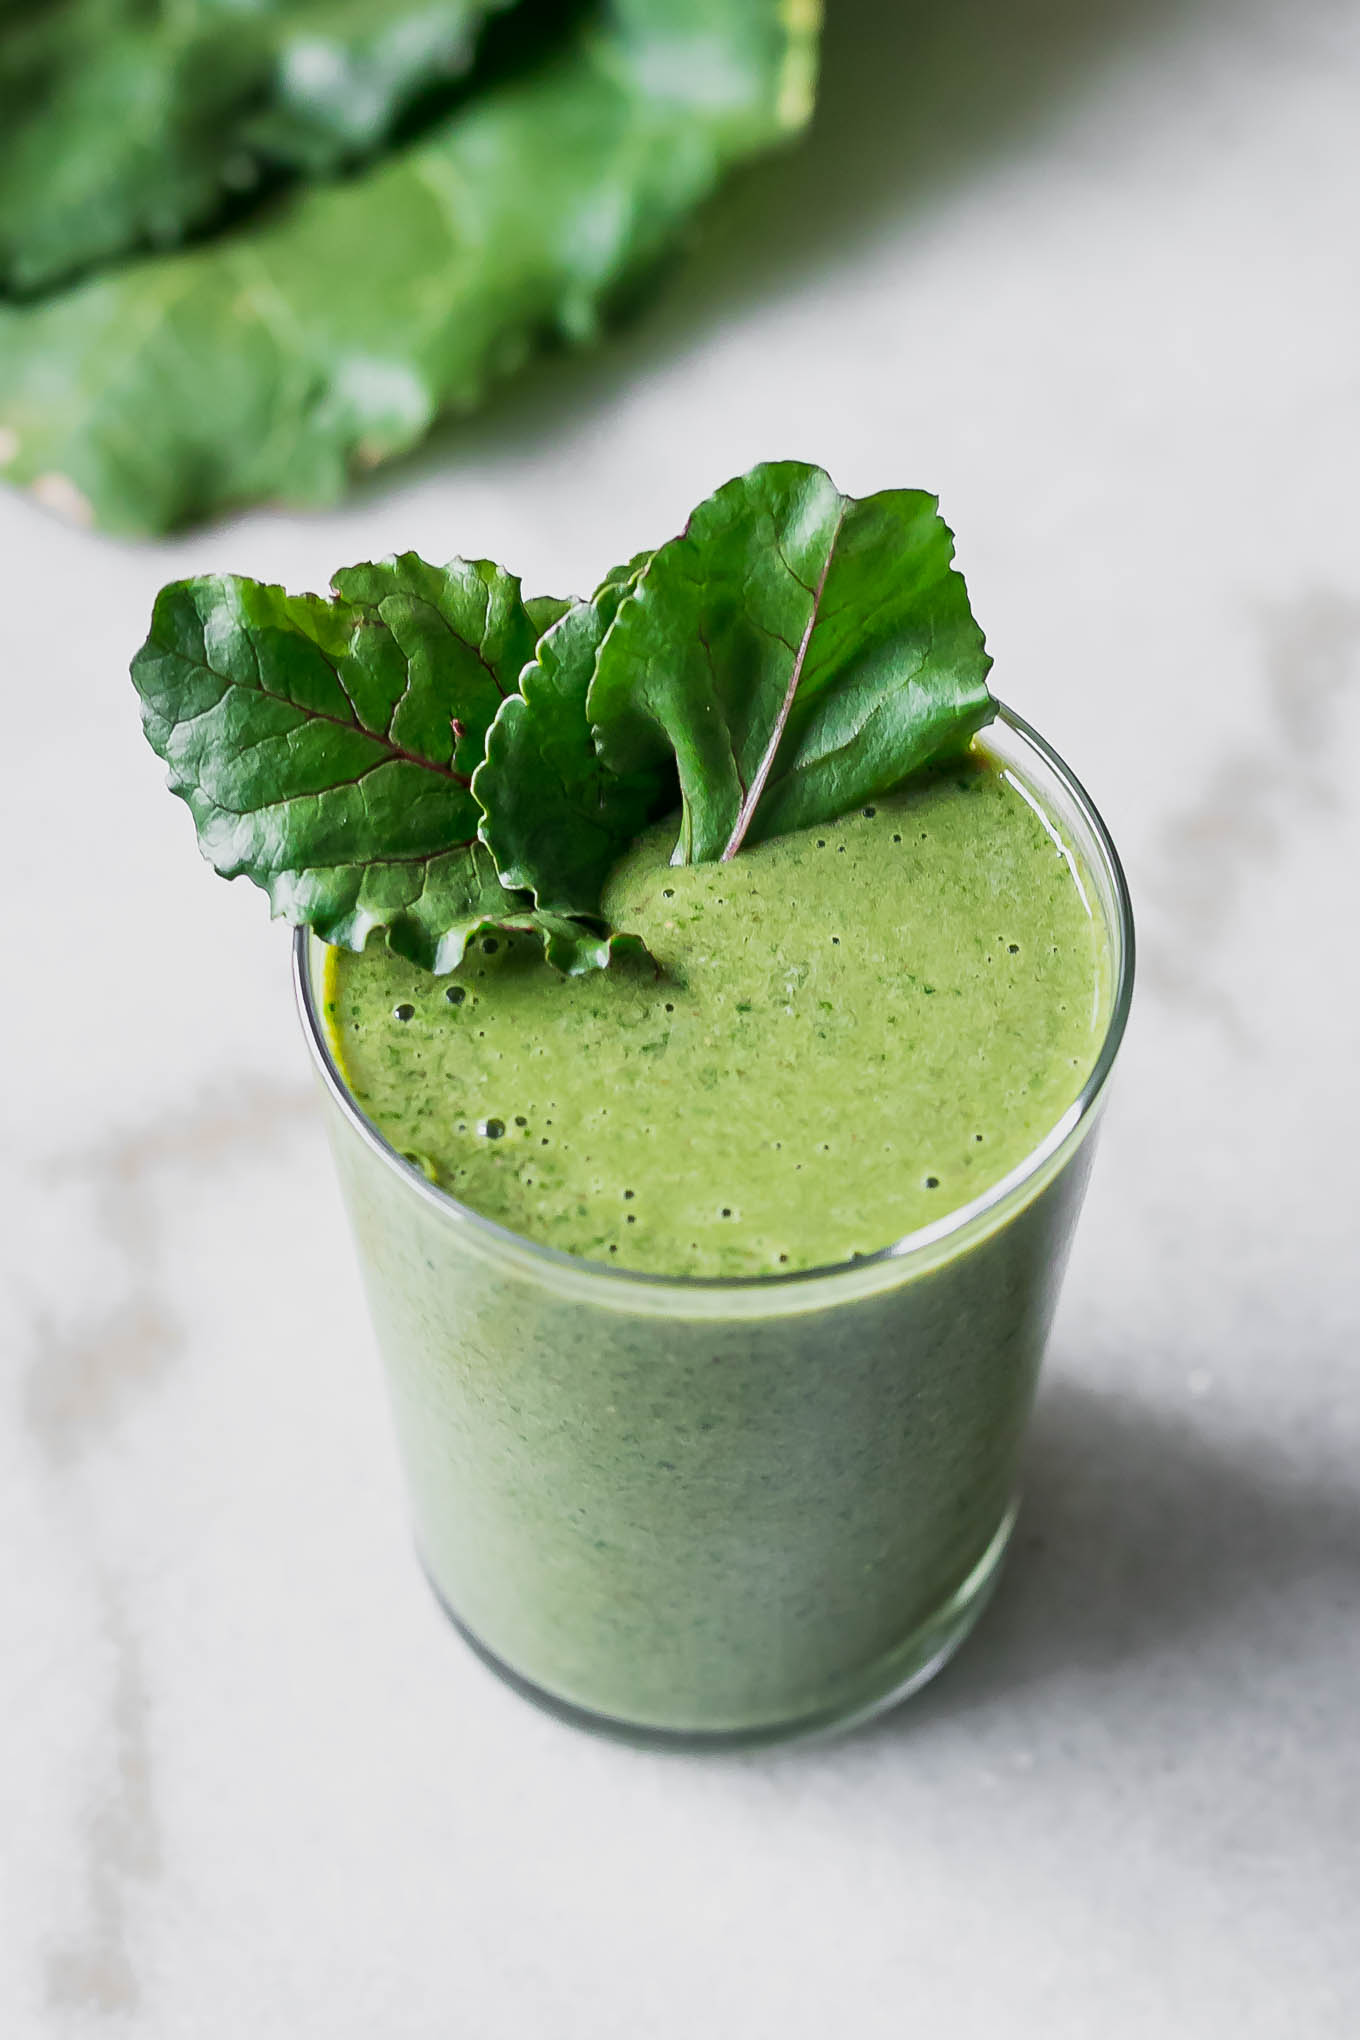 https://www.forkintheroad.co/wp-content/uploads/2022/02/beet-greens-smoothie-115.jpg